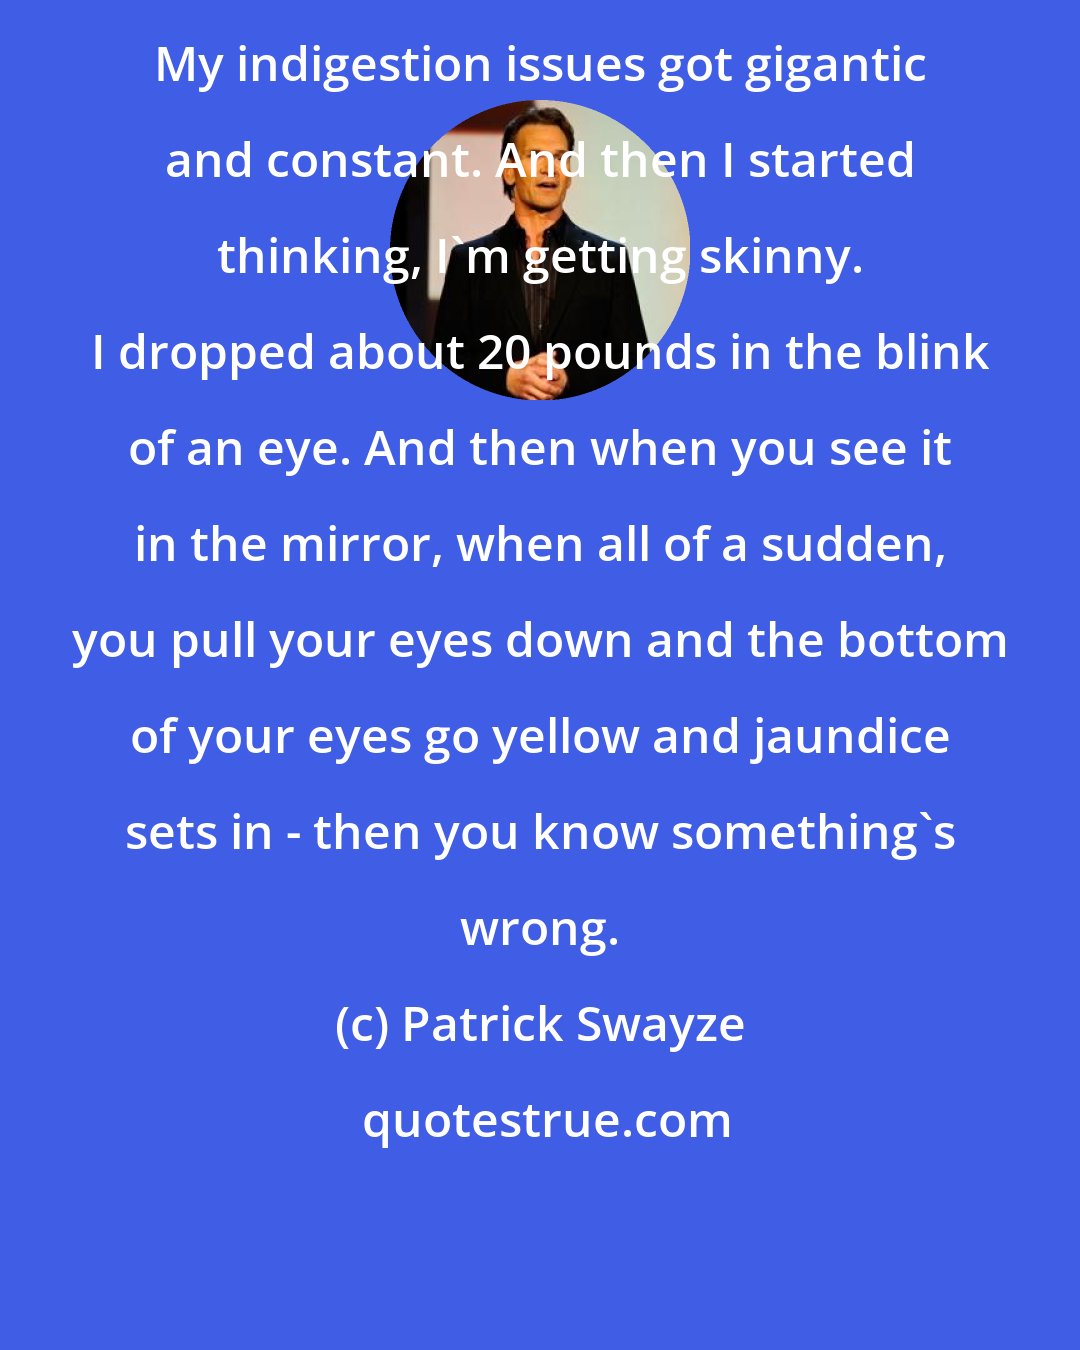 Patrick Swayze: My indigestion issues got gigantic and constant. And then I started thinking, I'm getting skinny. I dropped about 20 pounds in the blink of an eye. And then when you see it in the mirror, when all of a sudden, you pull your eyes down and the bottom of your eyes go yellow and jaundice sets in - then you know something's wrong.